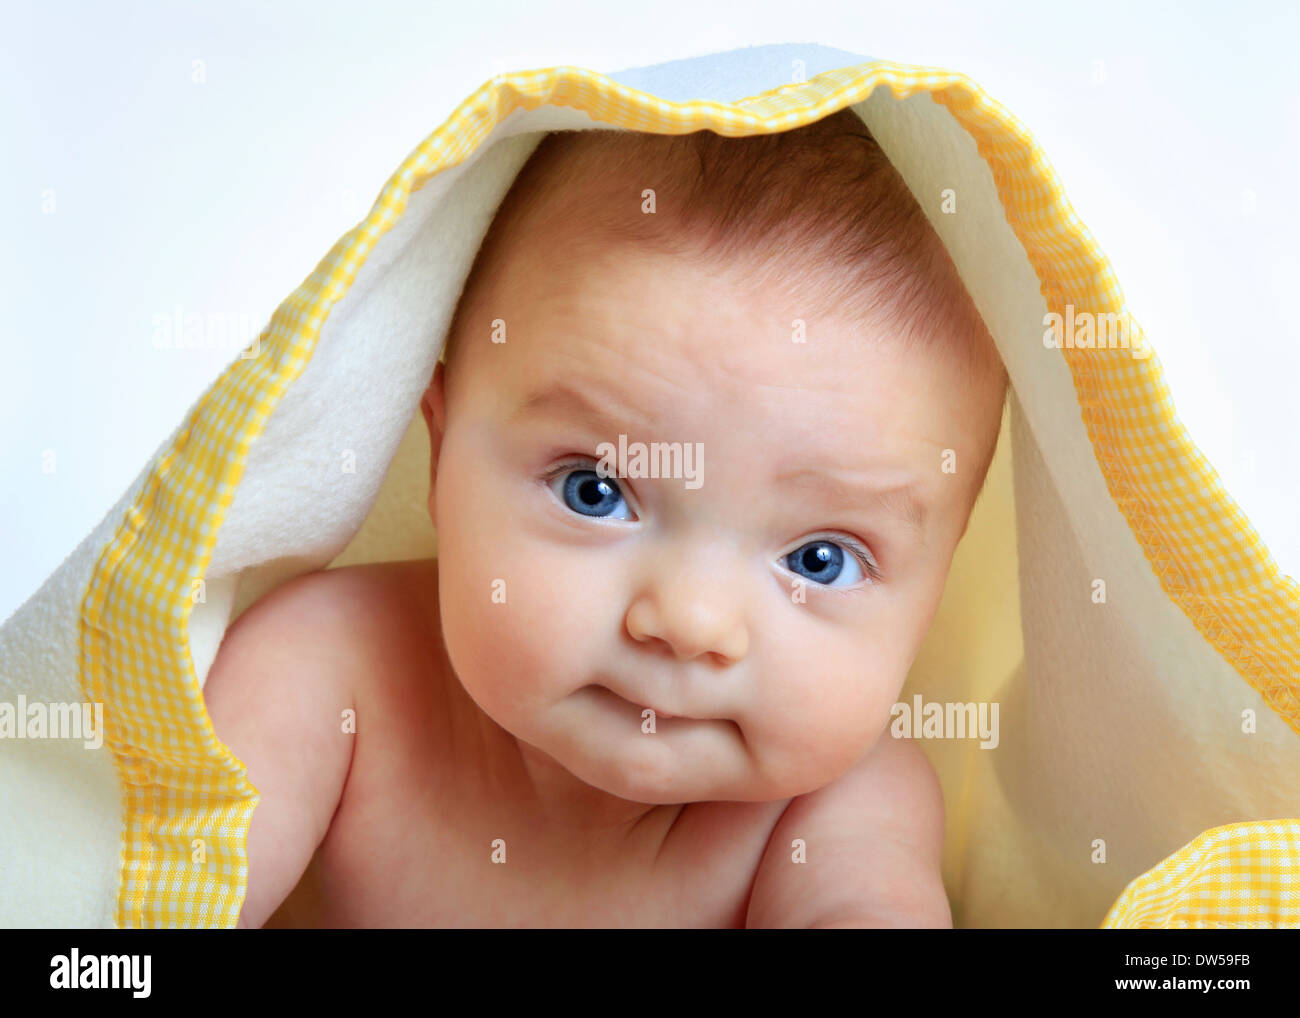 Baby girl under a white and yellow blanket, isolated on white background Stock Photo